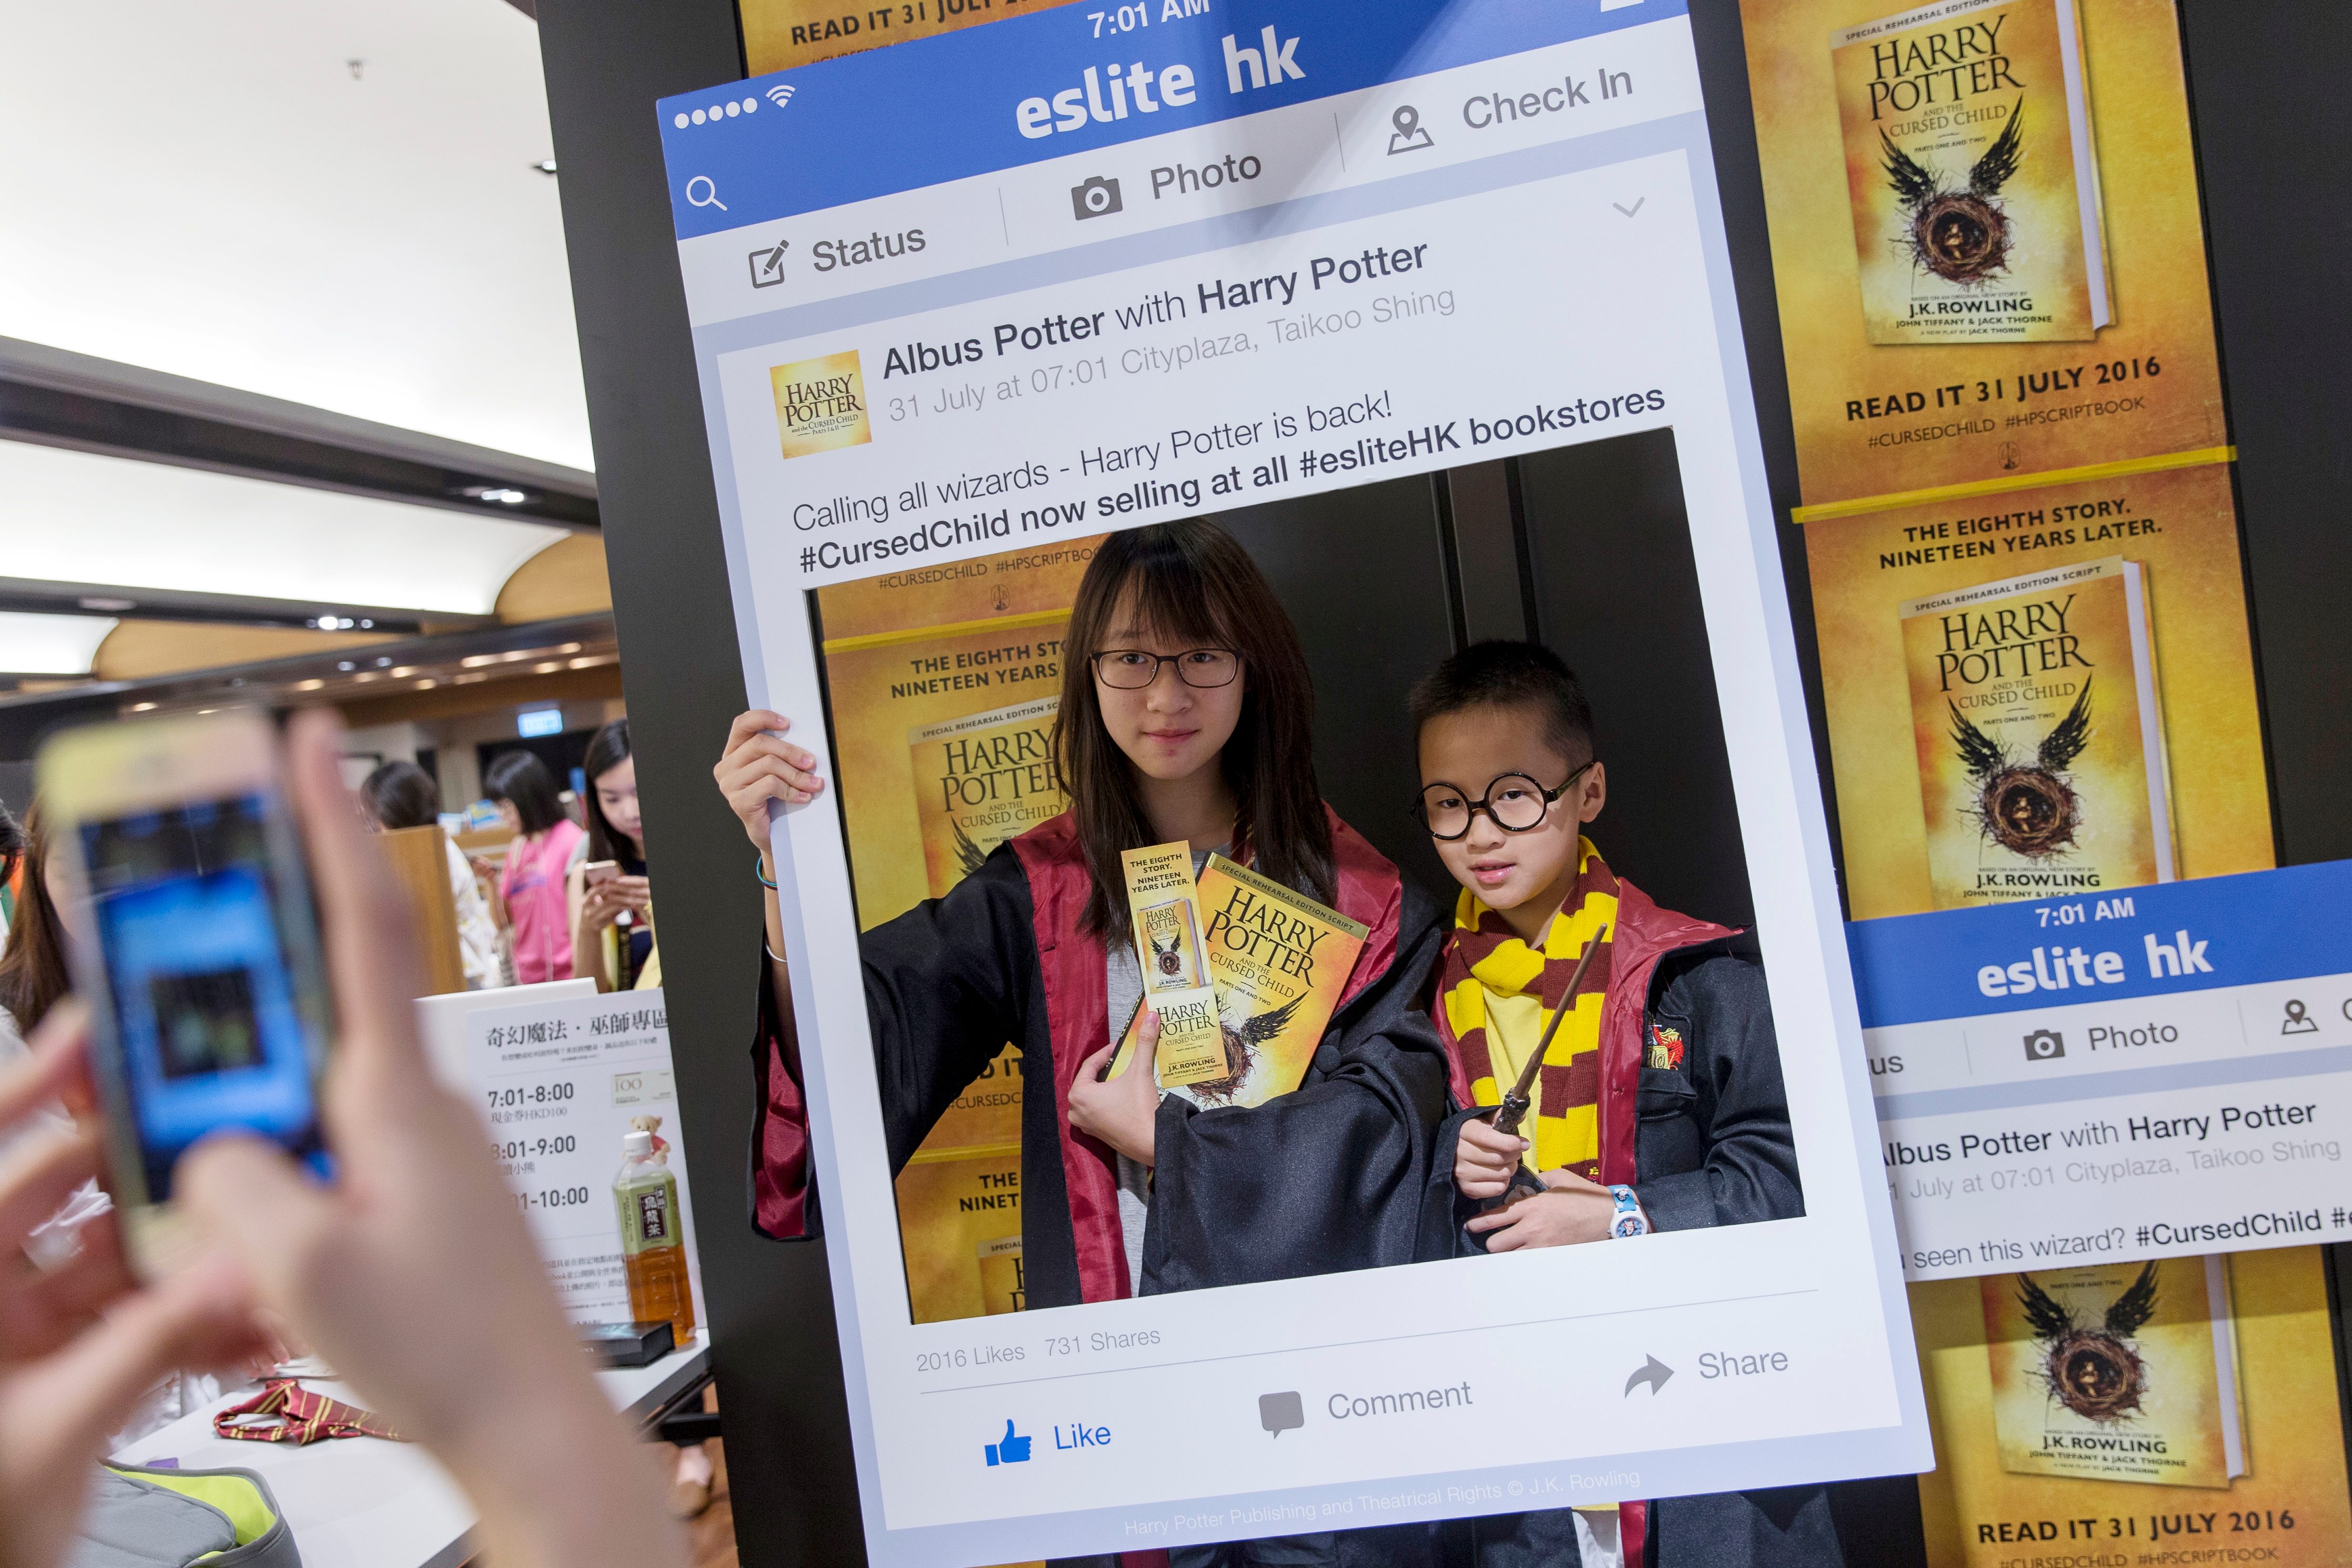 Harry Potter fans pose for a photo with a copy of J.K. Rowling's 'Harry Potter and the Cursed Child' at a bookstore in Hong Kong, China, 31 July 2016. Photo Jerome Favre/EPA 